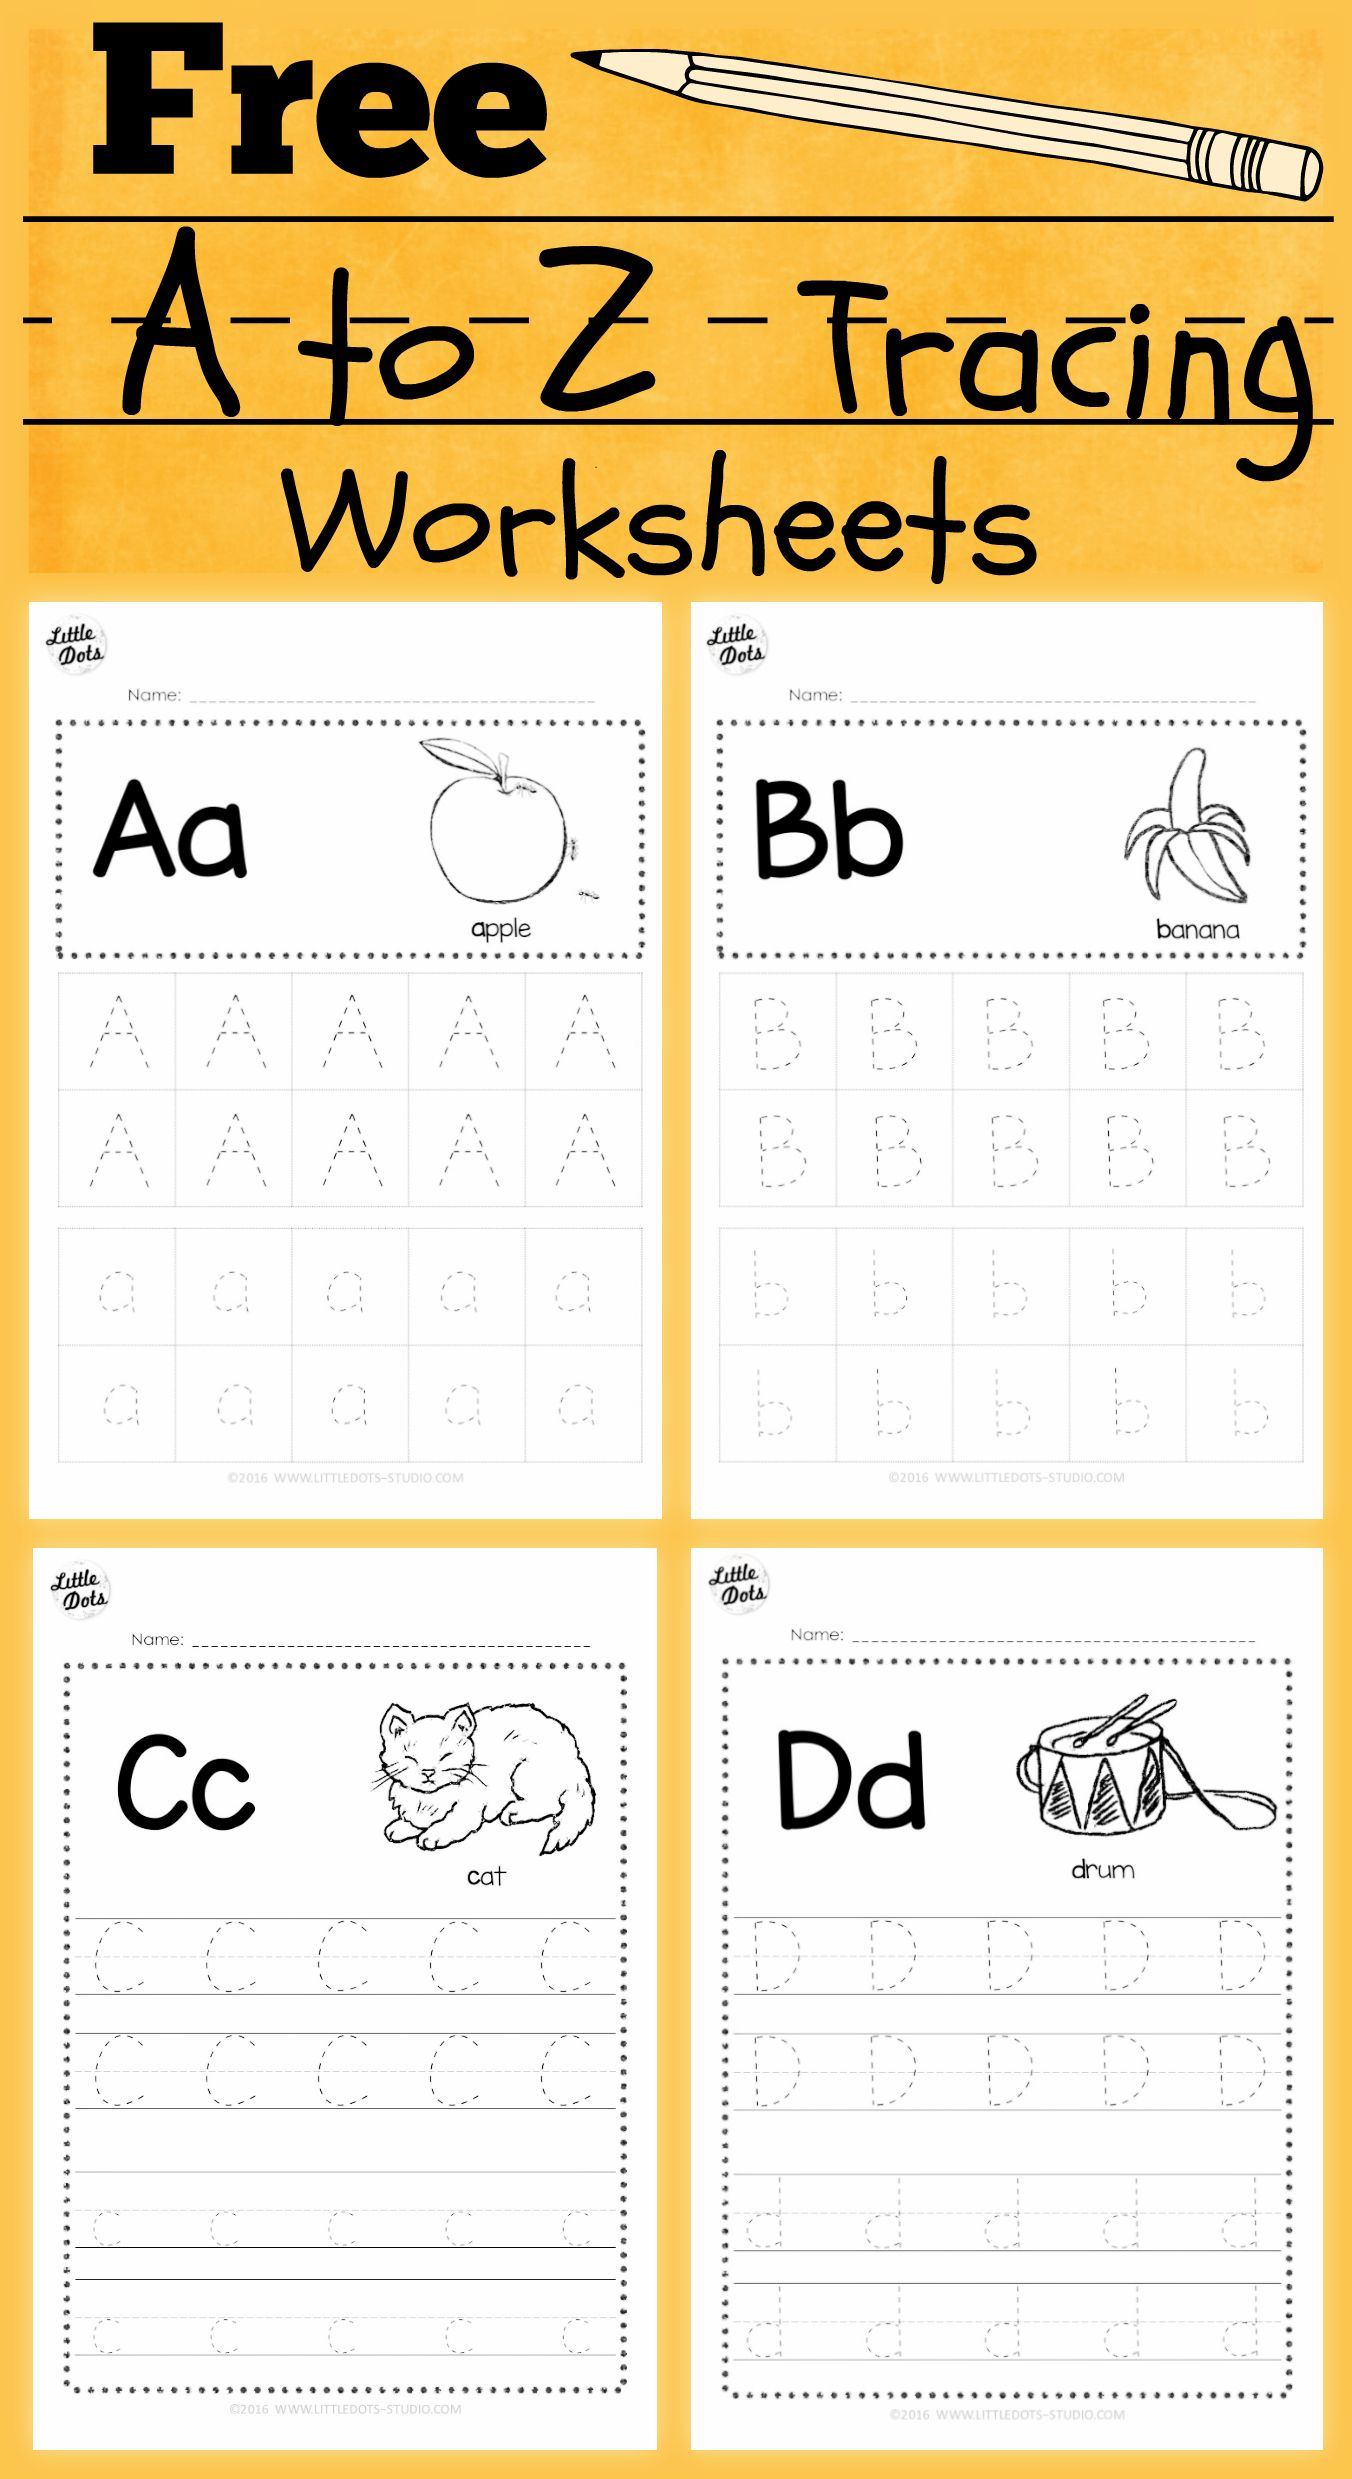 Download Free Alphabet Tracing Worksheets For Letter A To Z pertaining to Alphabet Worksheets Pdf Grade 1